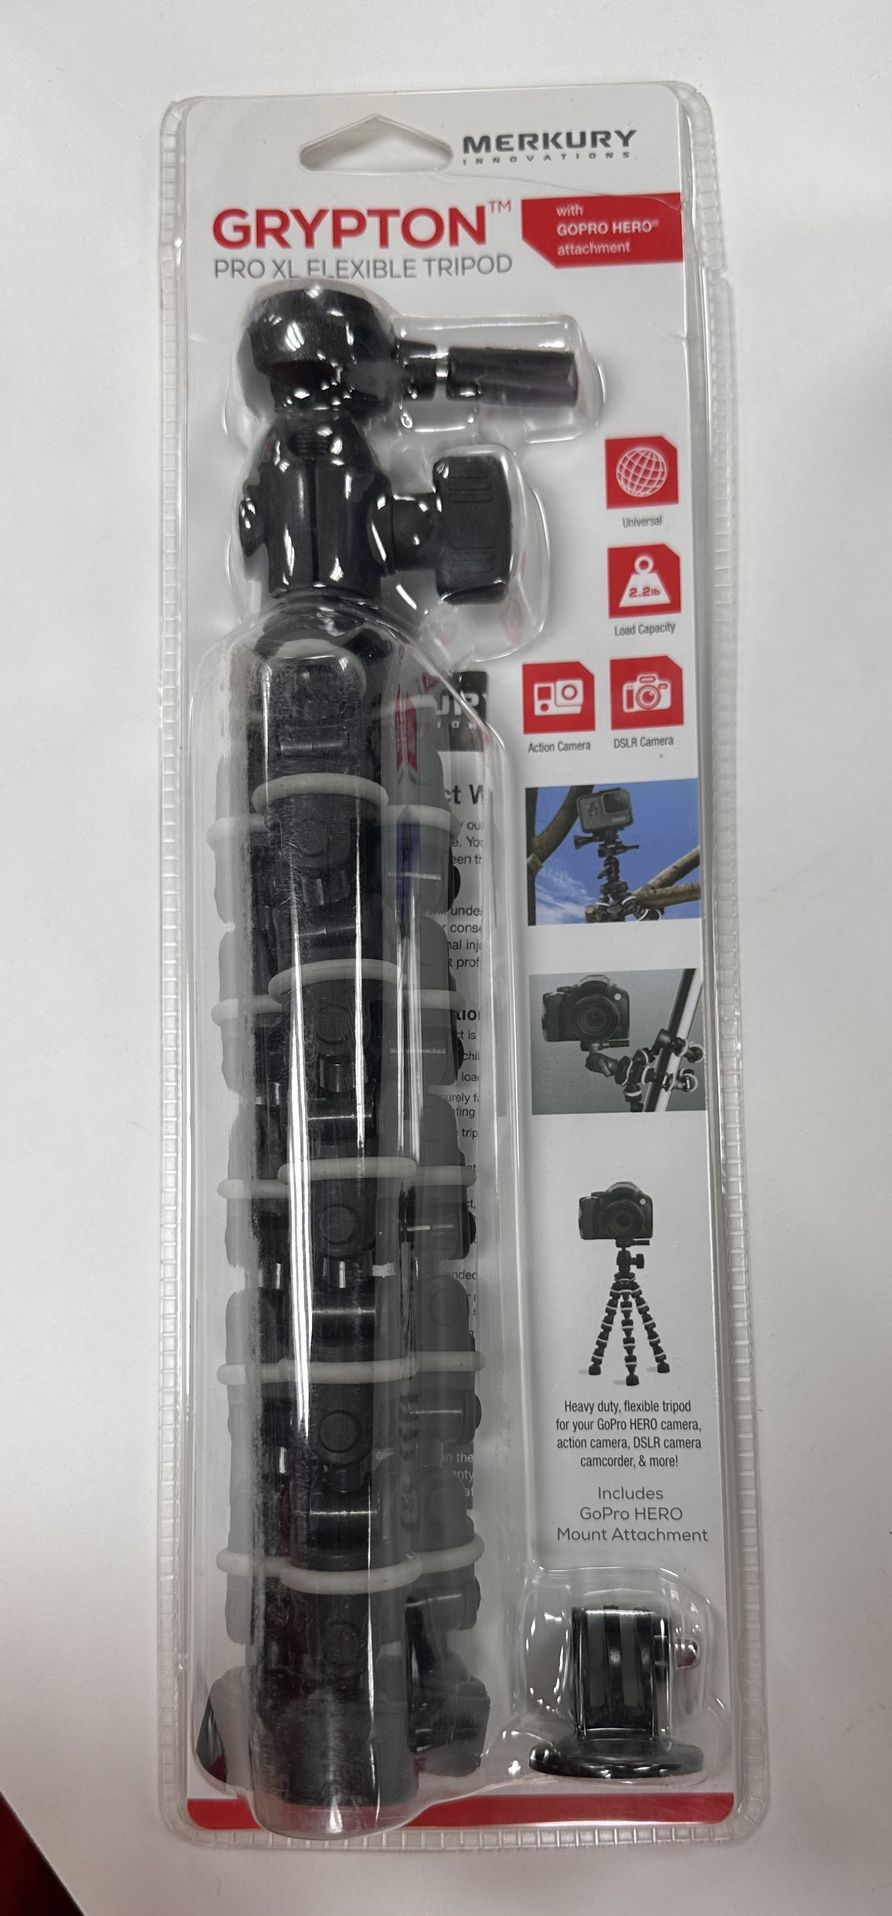 Tripod Compatible with Go Pro Hero And DSLR